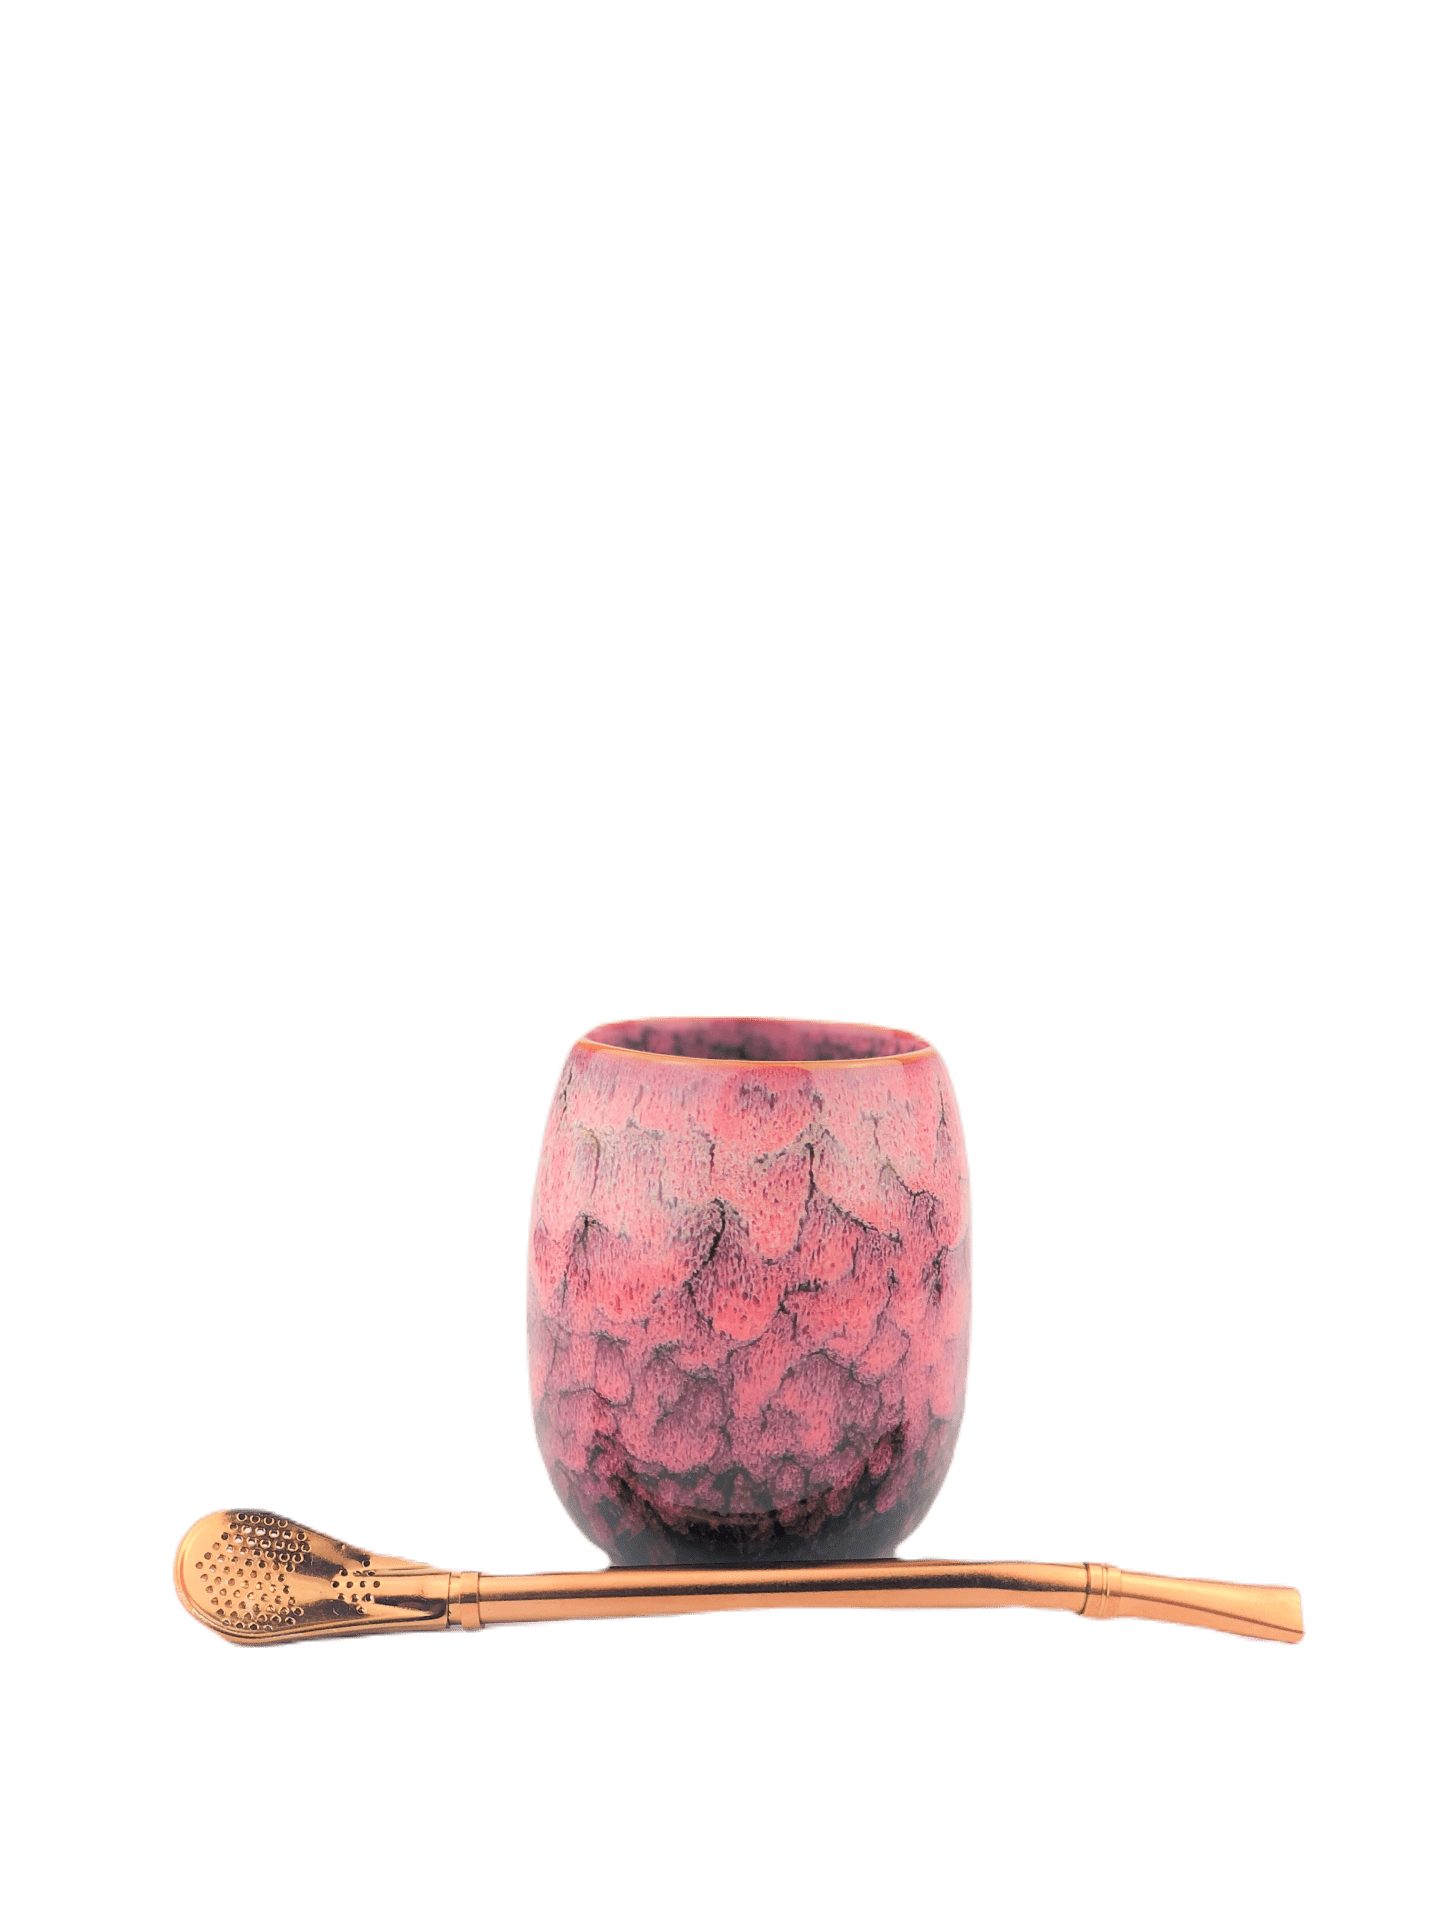 Ceramic Mate Gourd and Straw Set (Mate and bombilla)